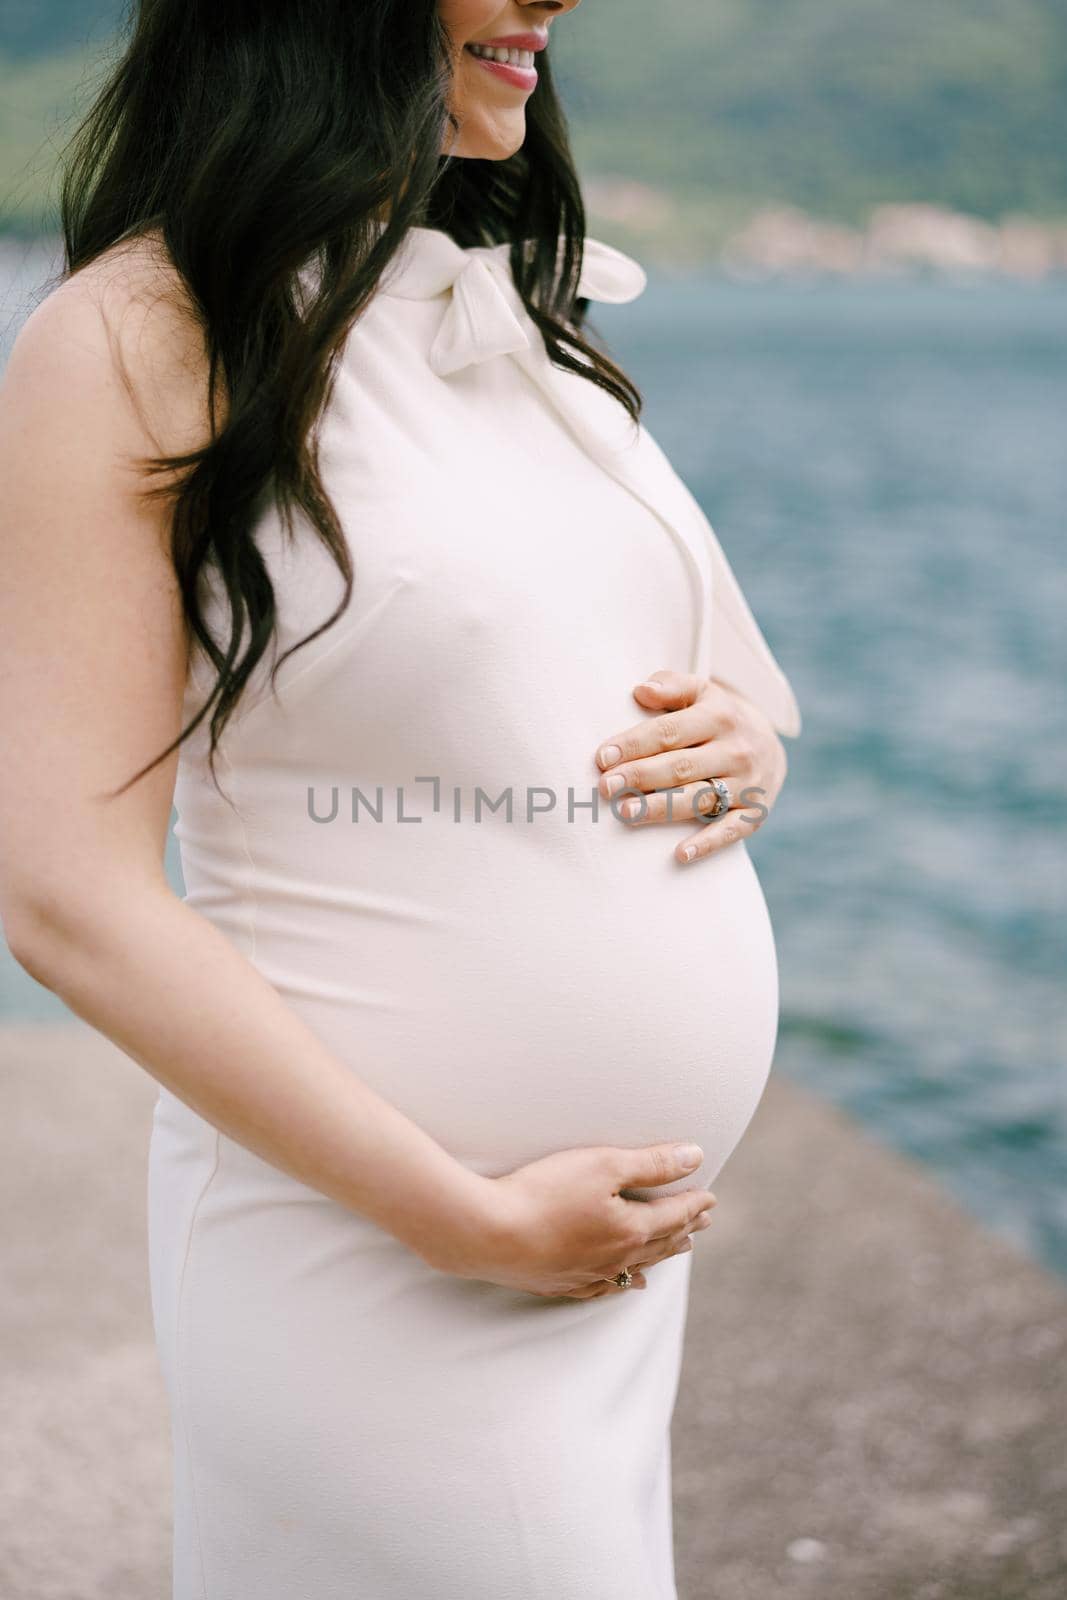 Pregnant woman in a dress stands hugging her tummy with her hands on the pier by the sea. High quality photo